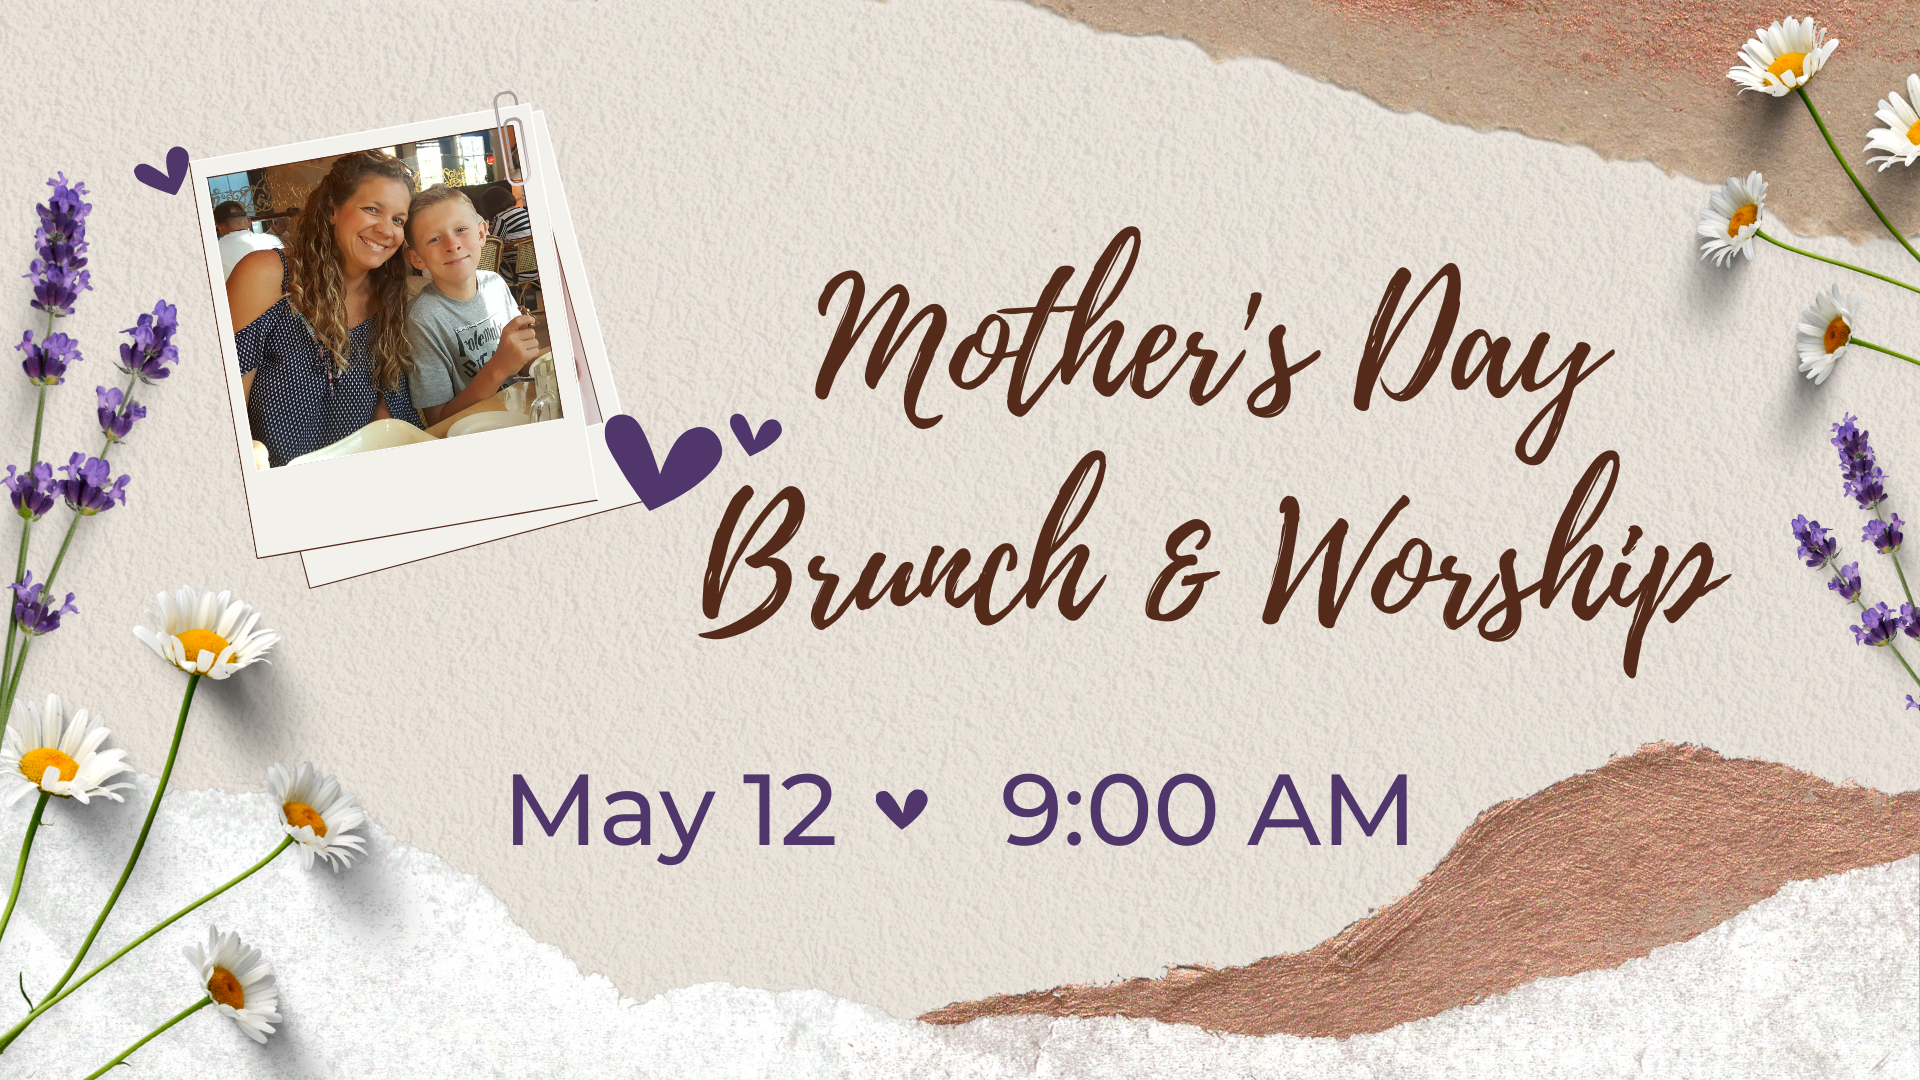 Copy of Mother's Day Brunch & Sunday Worship.png